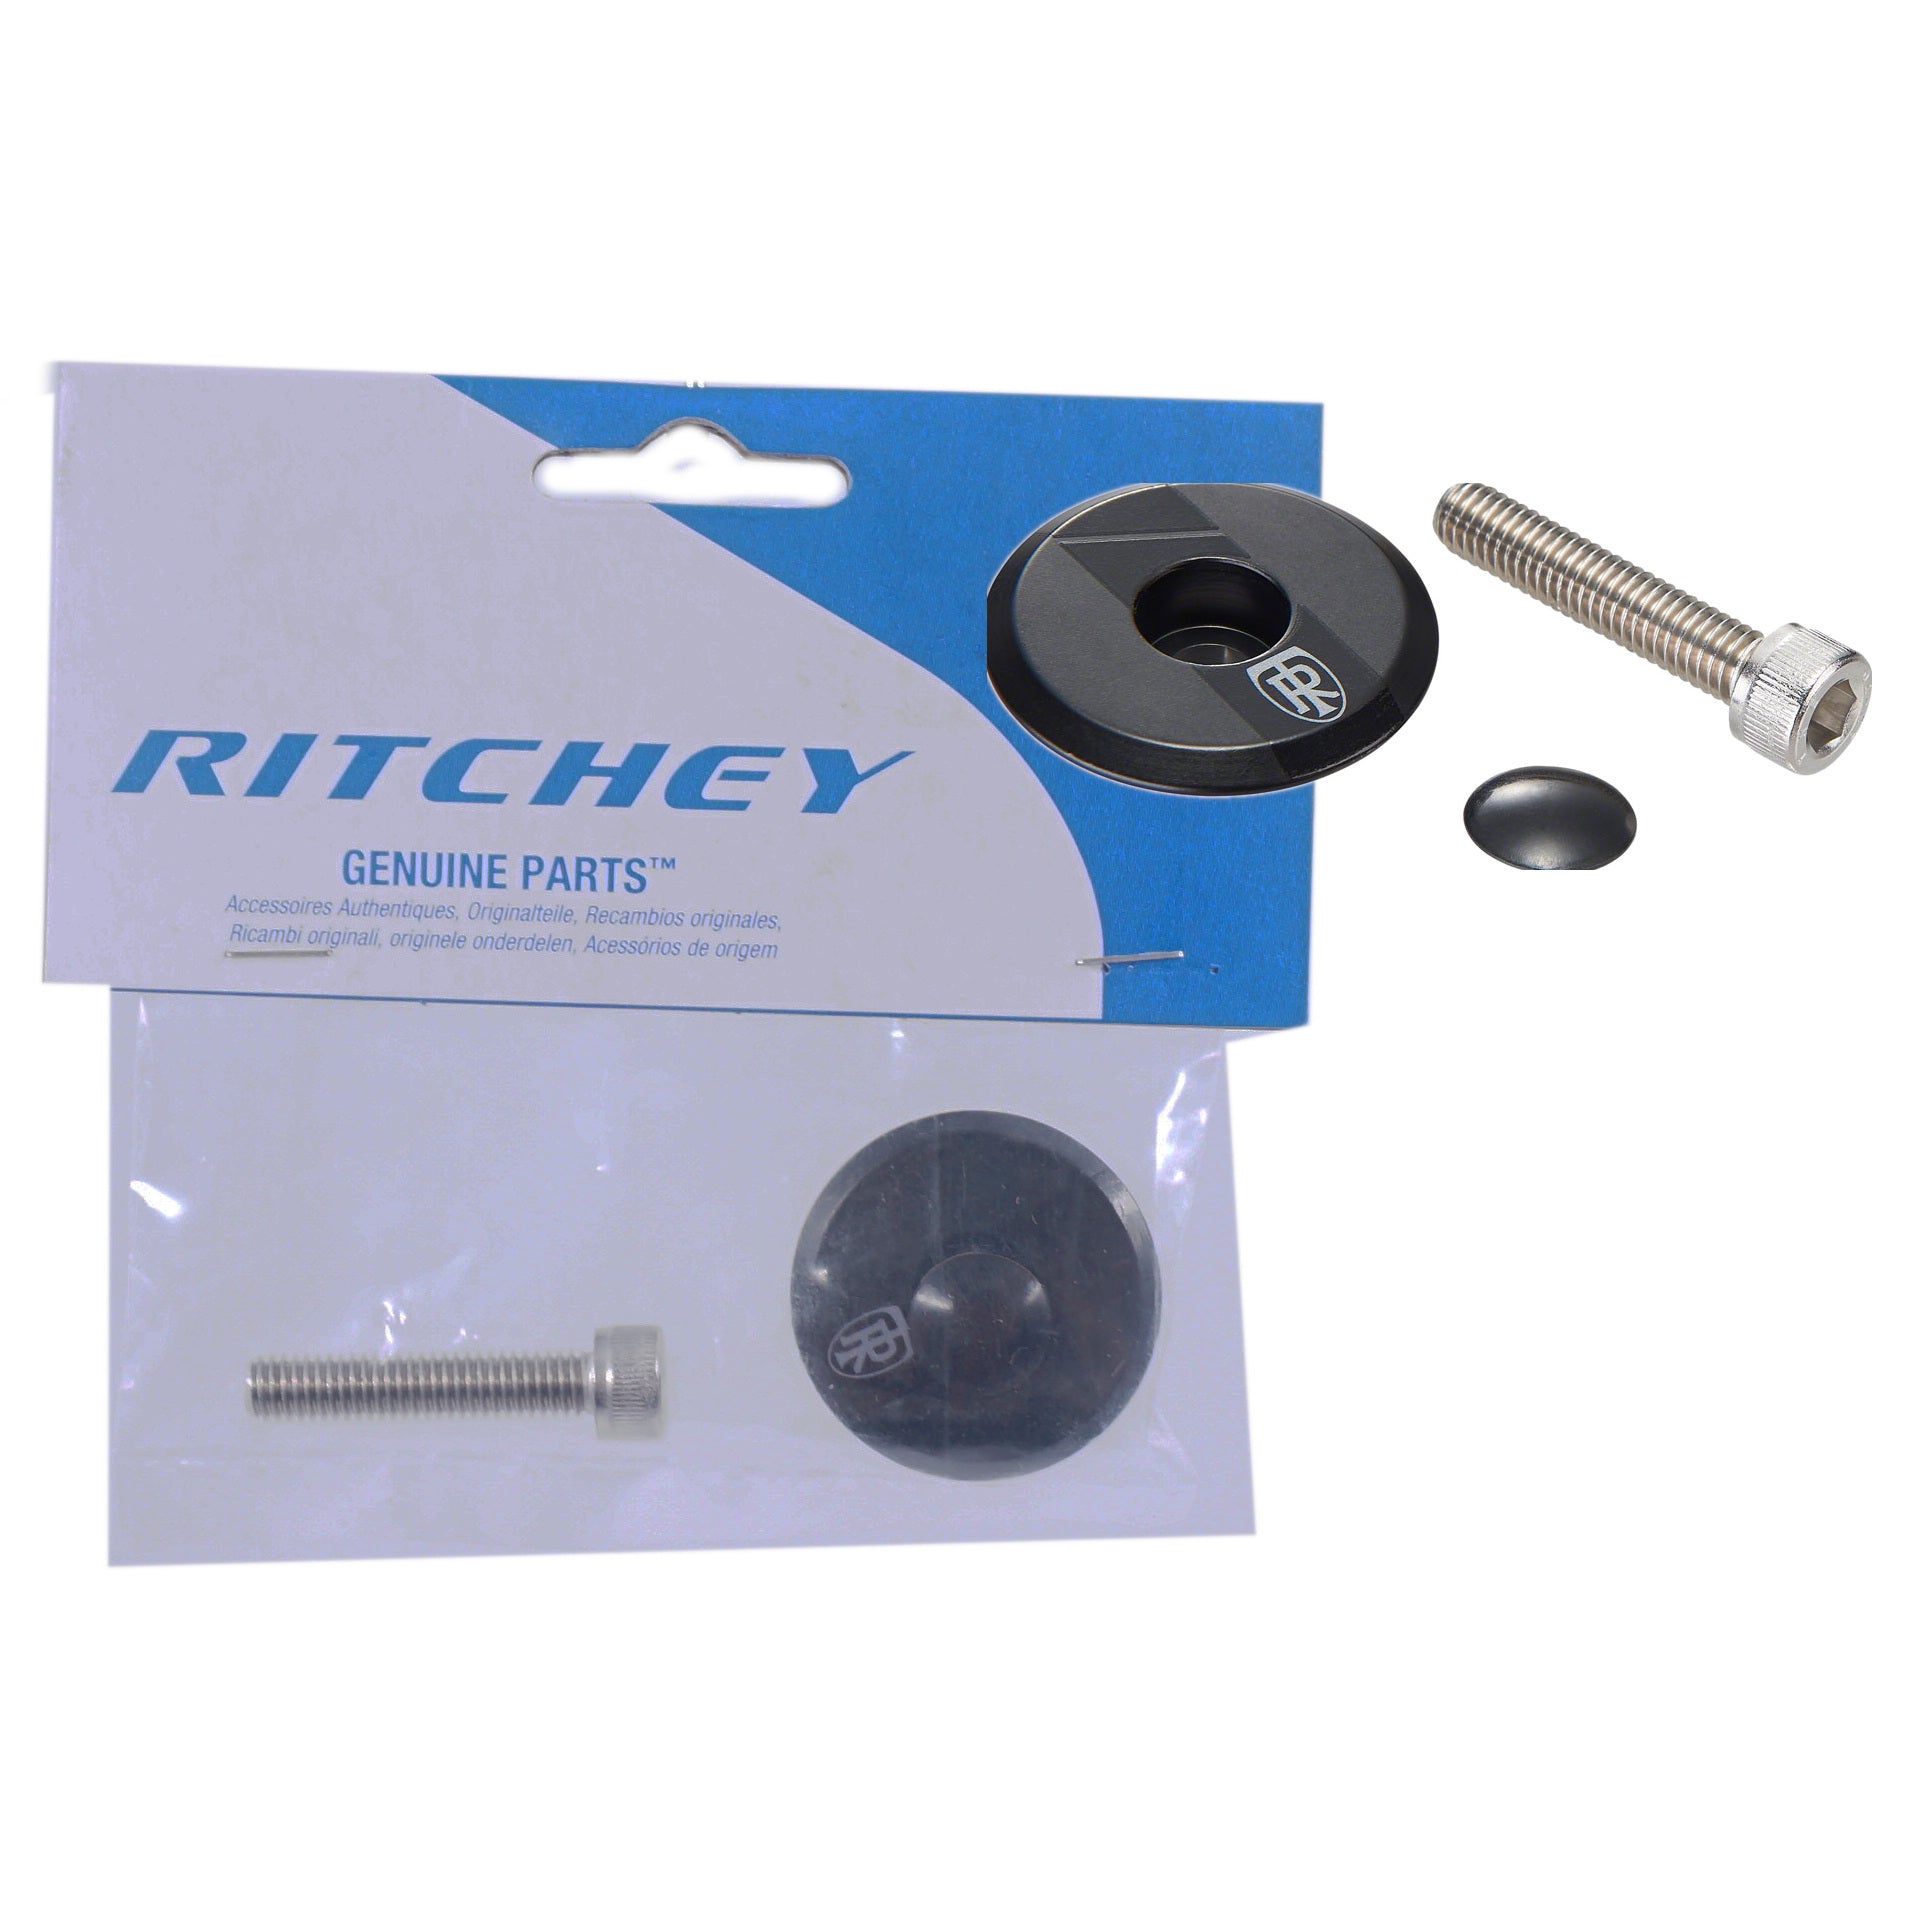 Ritchey WCS Stem Top Cap with Bolt - 1-1/8" - The Bikesmiths